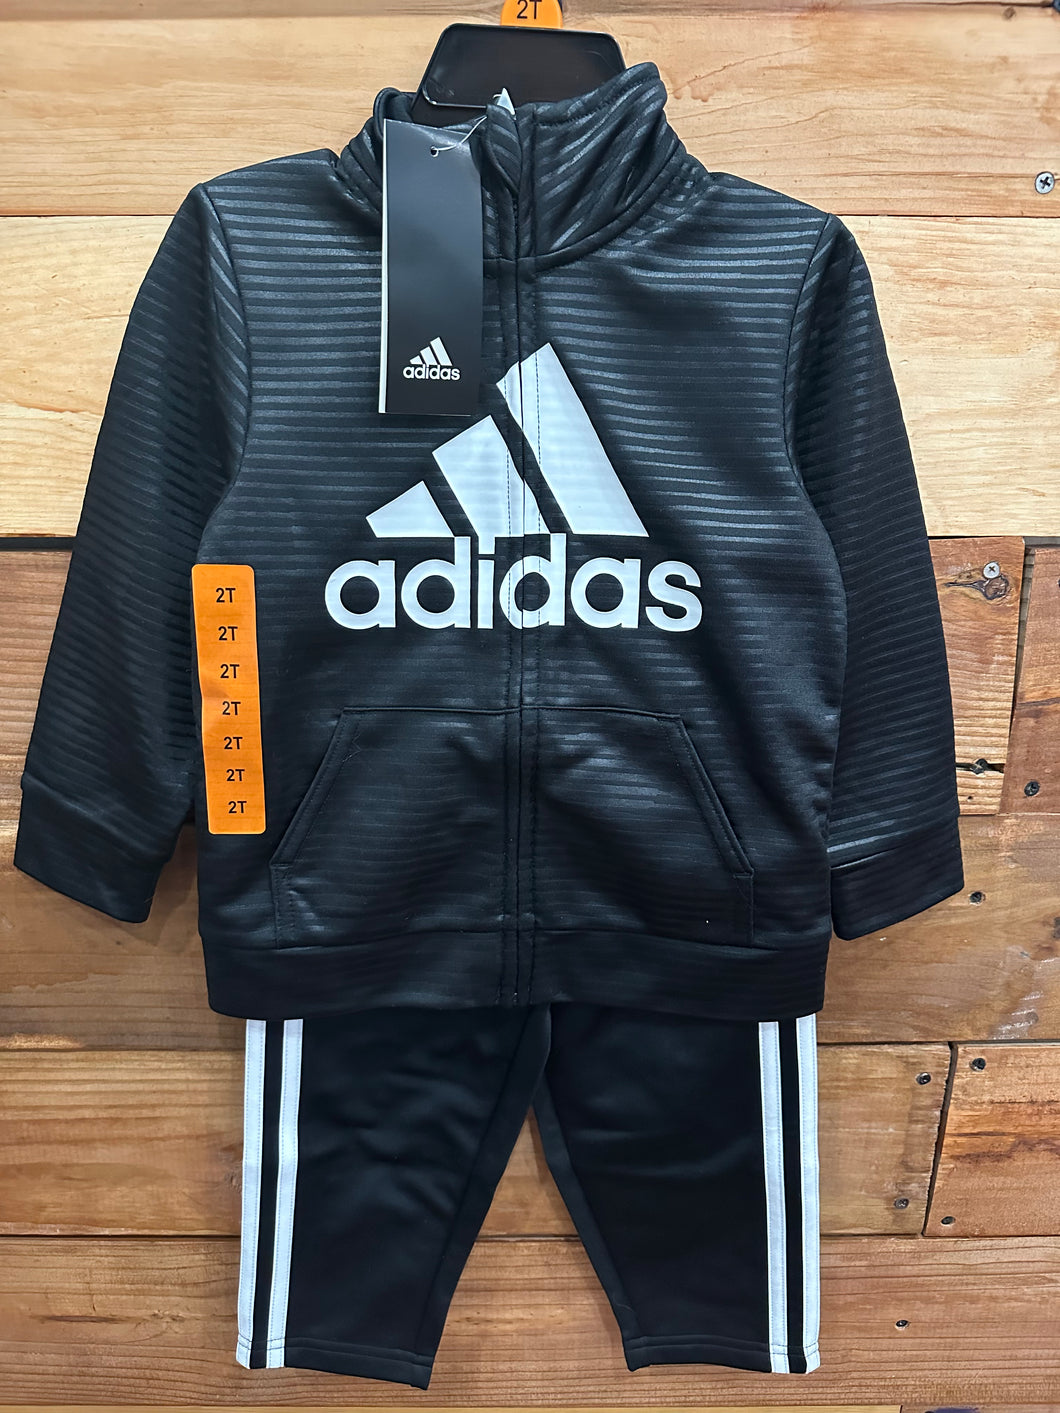 Adidas Black 2pc Outfit Size 2T